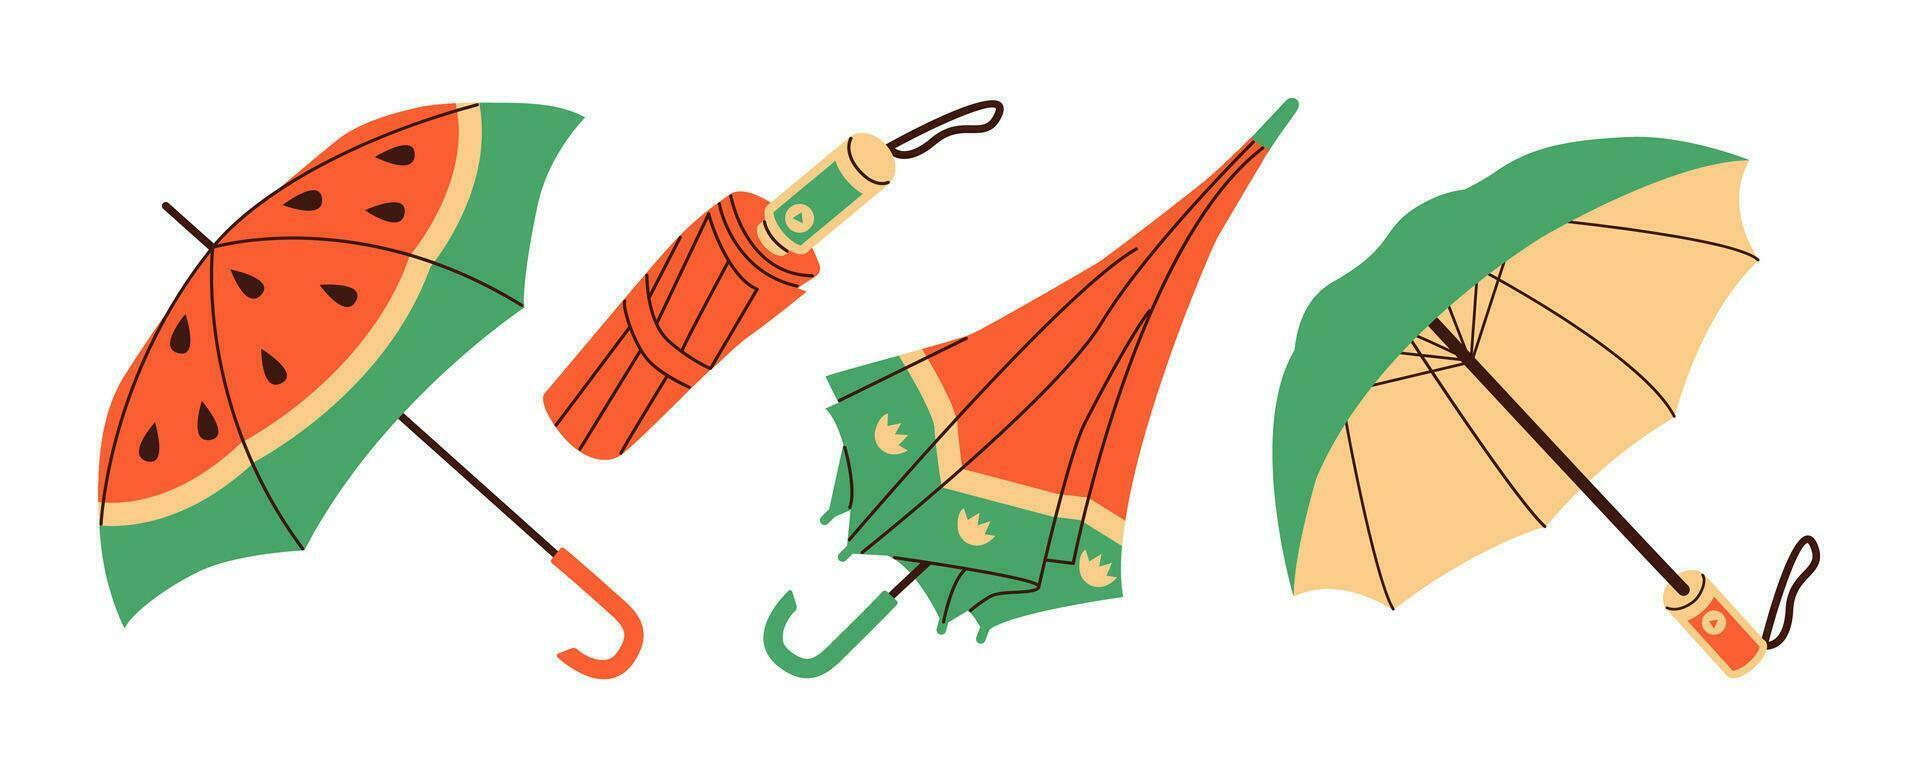 Set of different Umbrellas in various positions, Open and folded umbrellas. Flat vector illustration.